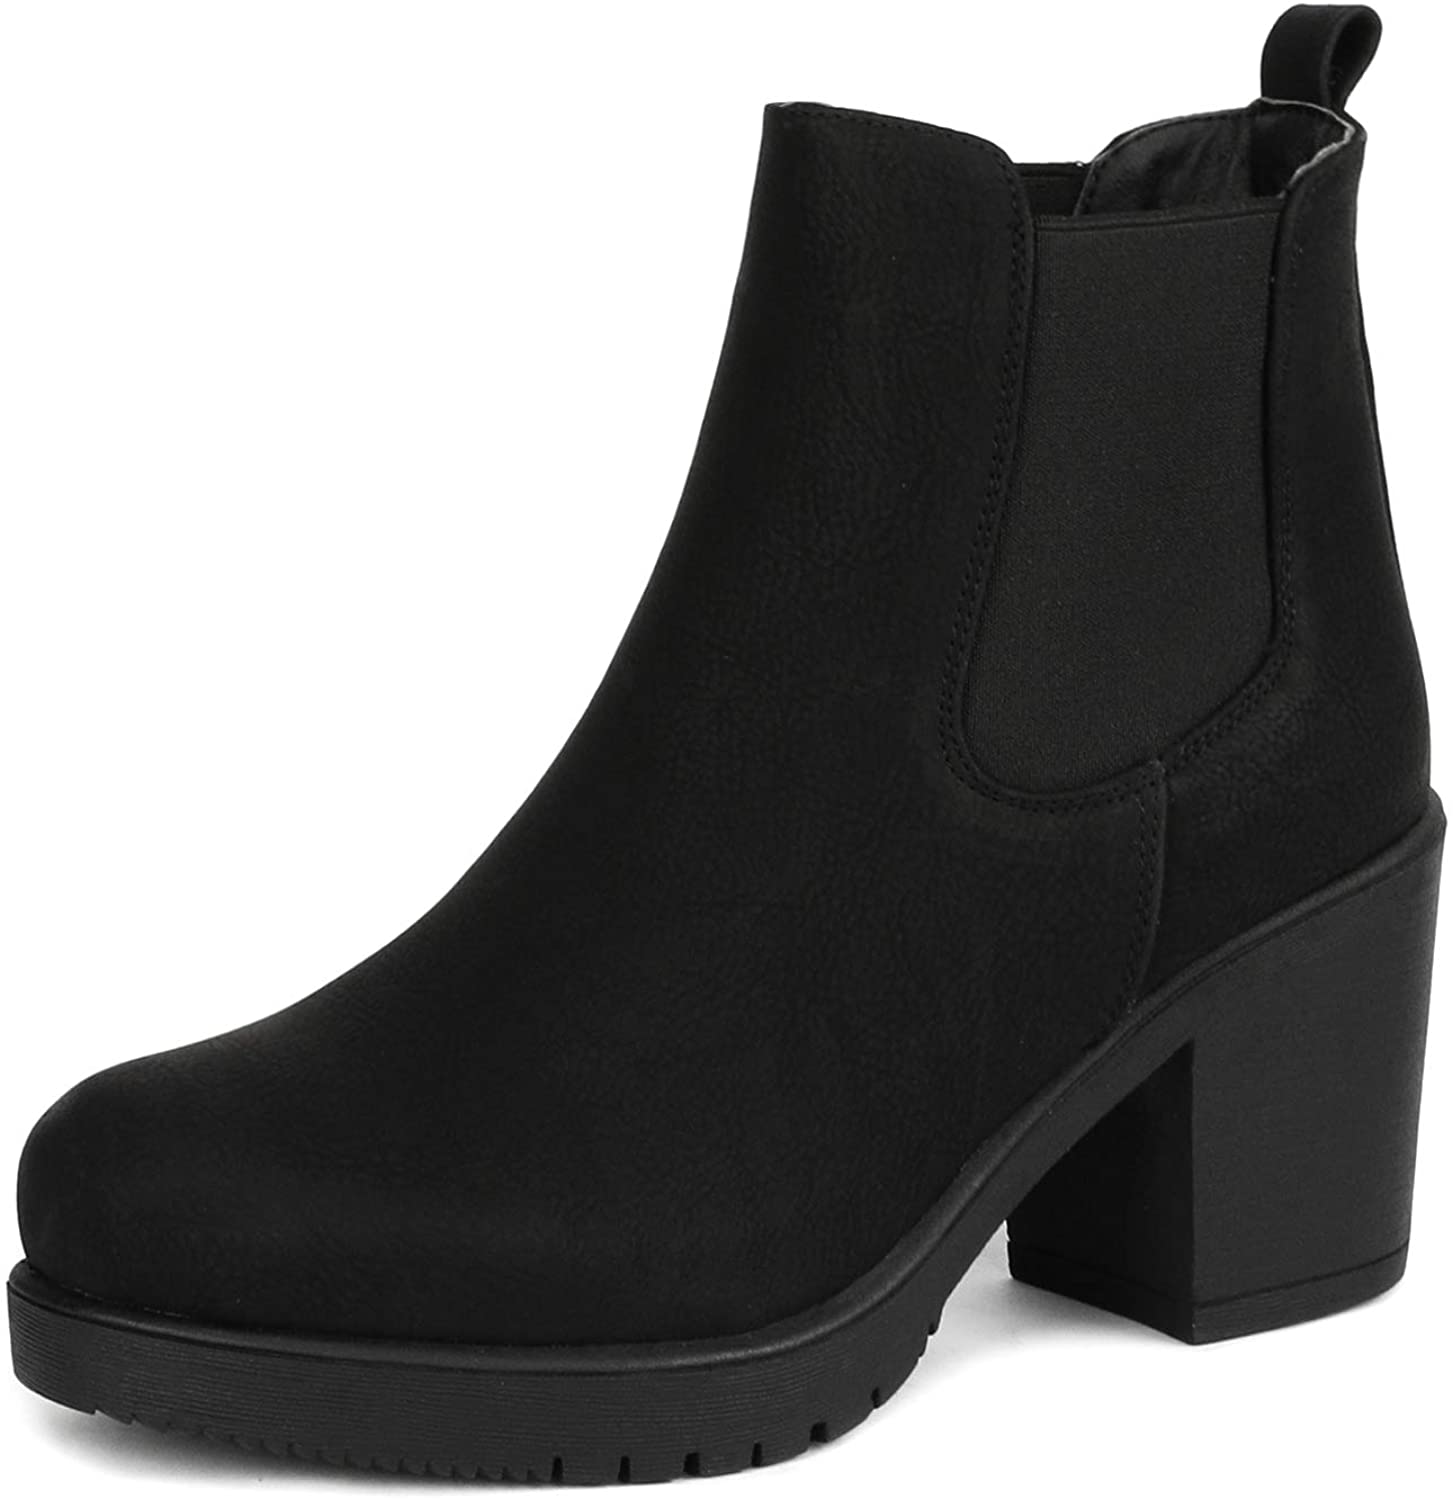 DREAM PAIRS Womens FRE High Heel Chelsea Style Ankle Boots